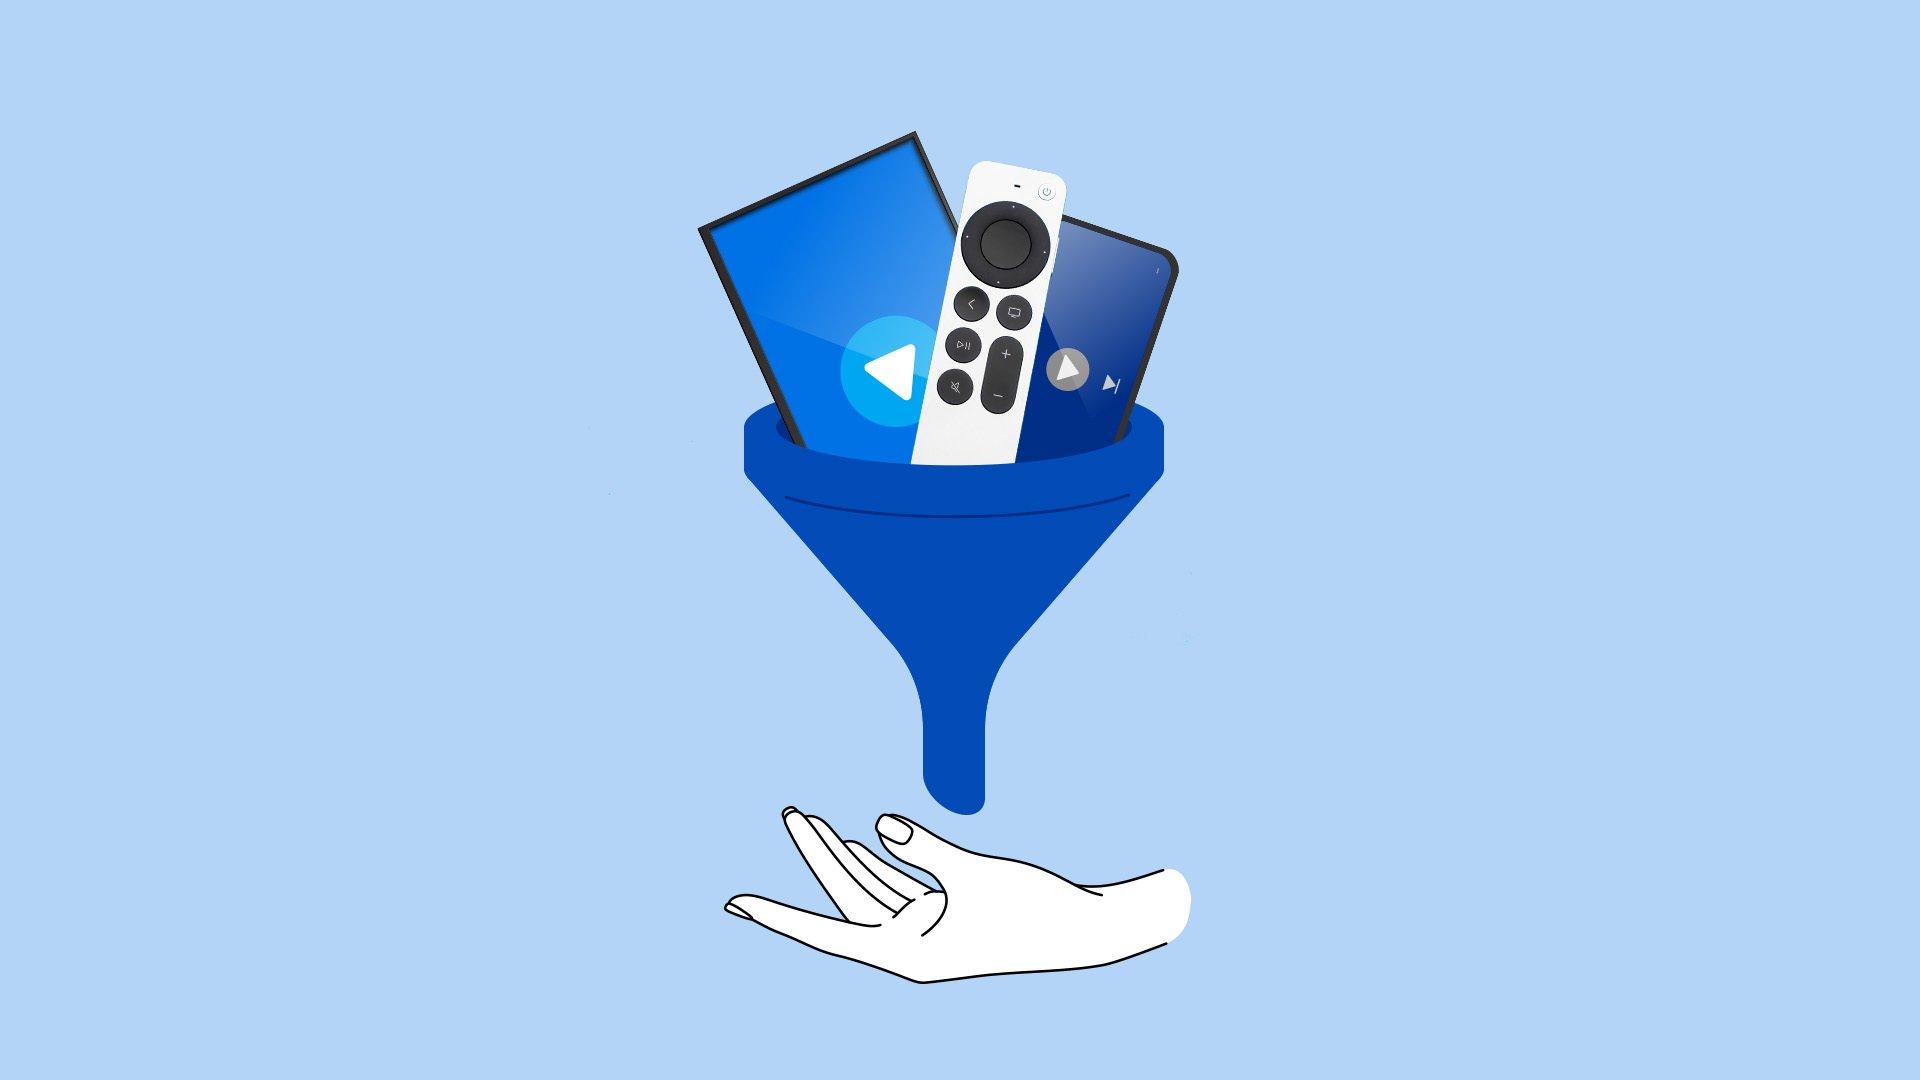 Graphic shows funnel with a tablet, TV remote, and phone, floating over a hand.